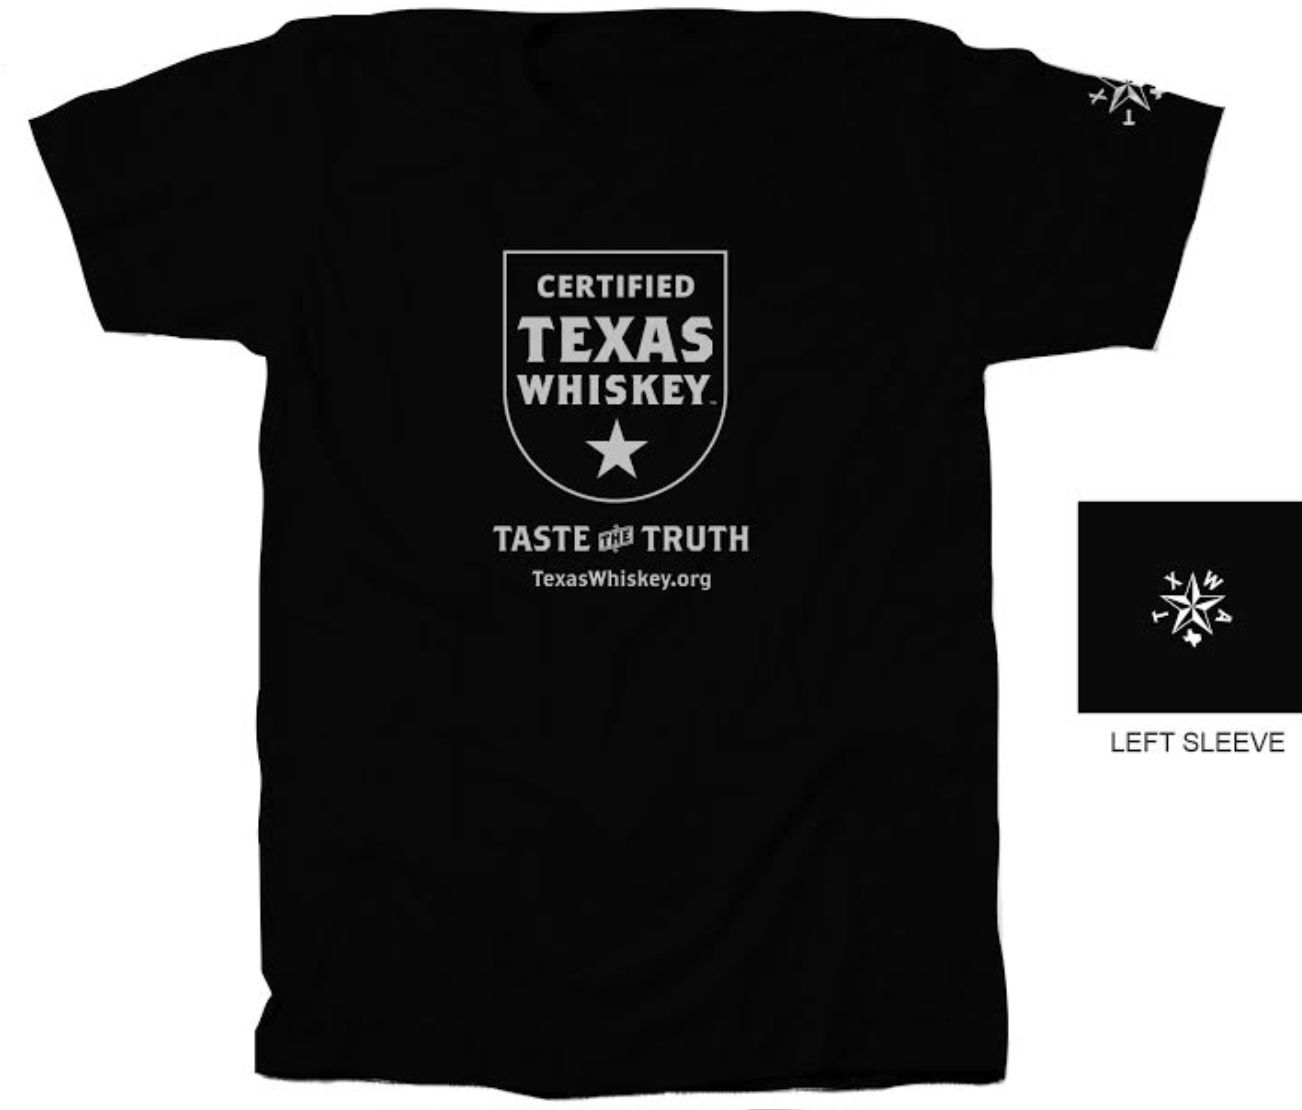 Certified Texas Whiskey Taste the Truth T-Shirt